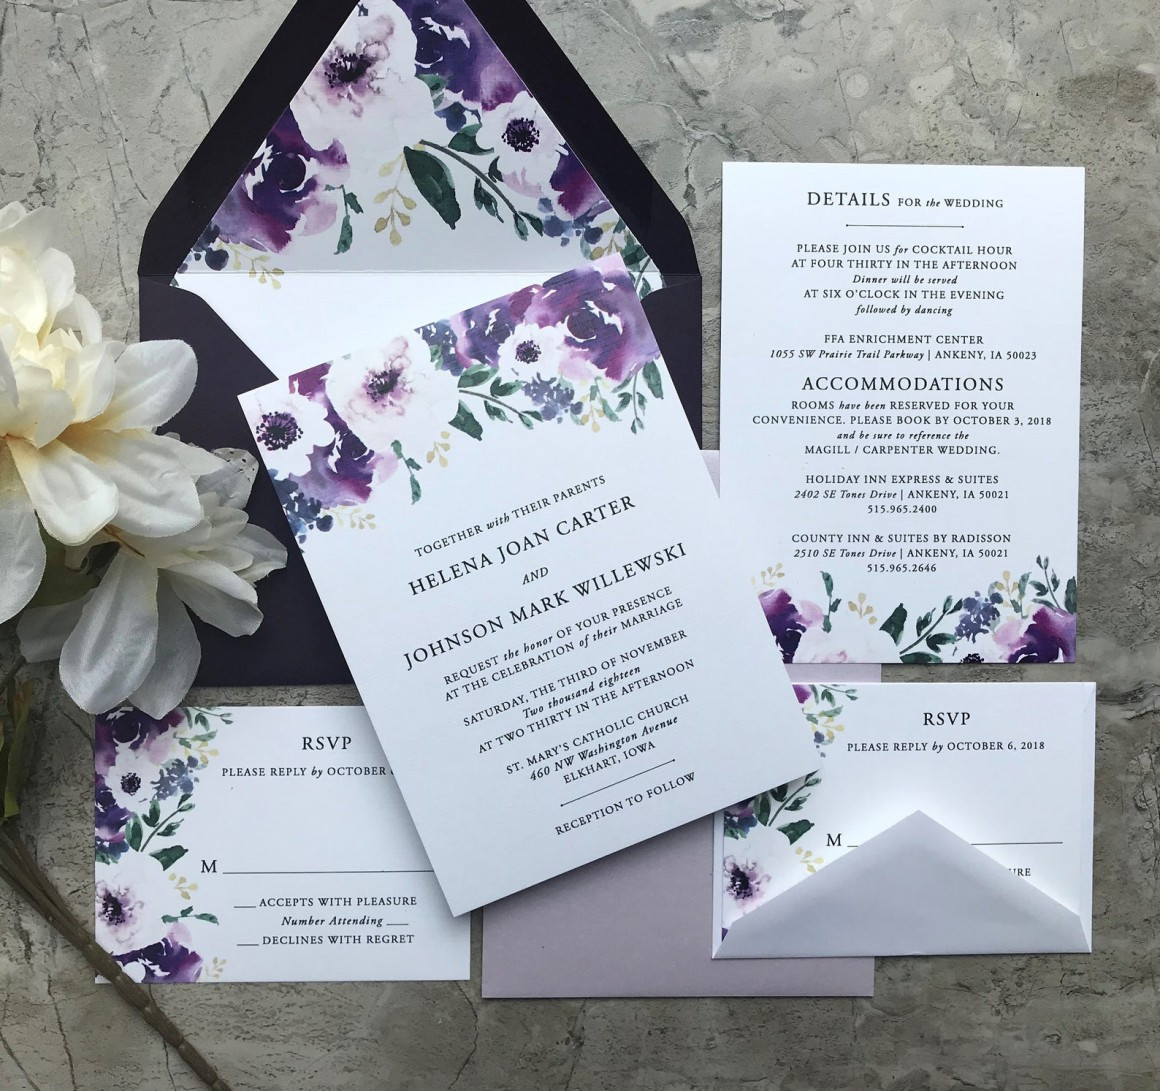 Wedding Invitations Inexpensive
 Inexpensive Wedding Invitations That Look Anything But